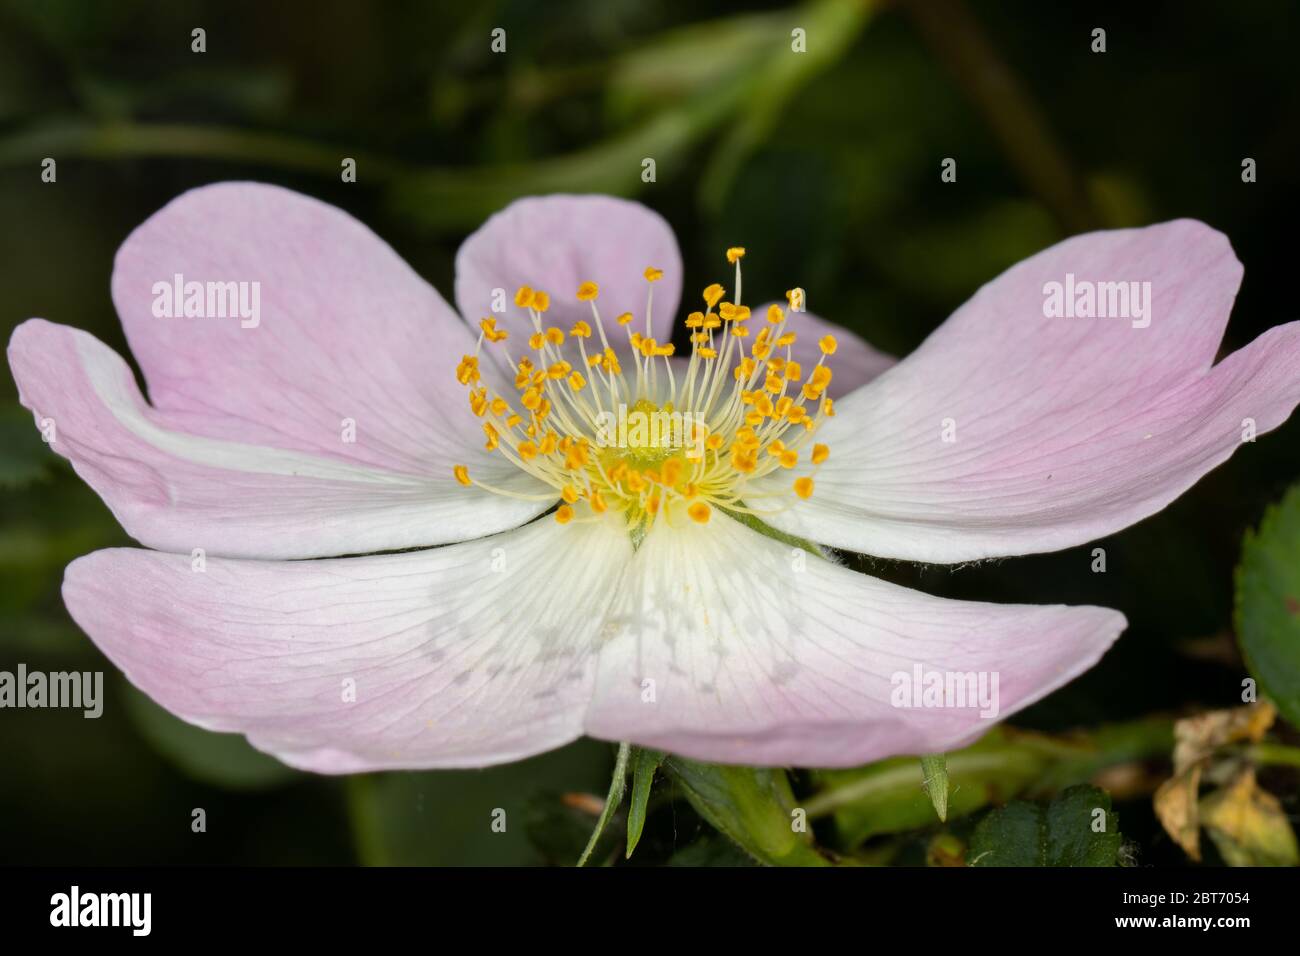 Close up of beautiful wild rose with pinkish white petals and yellow pollen covered stems Stock Photo